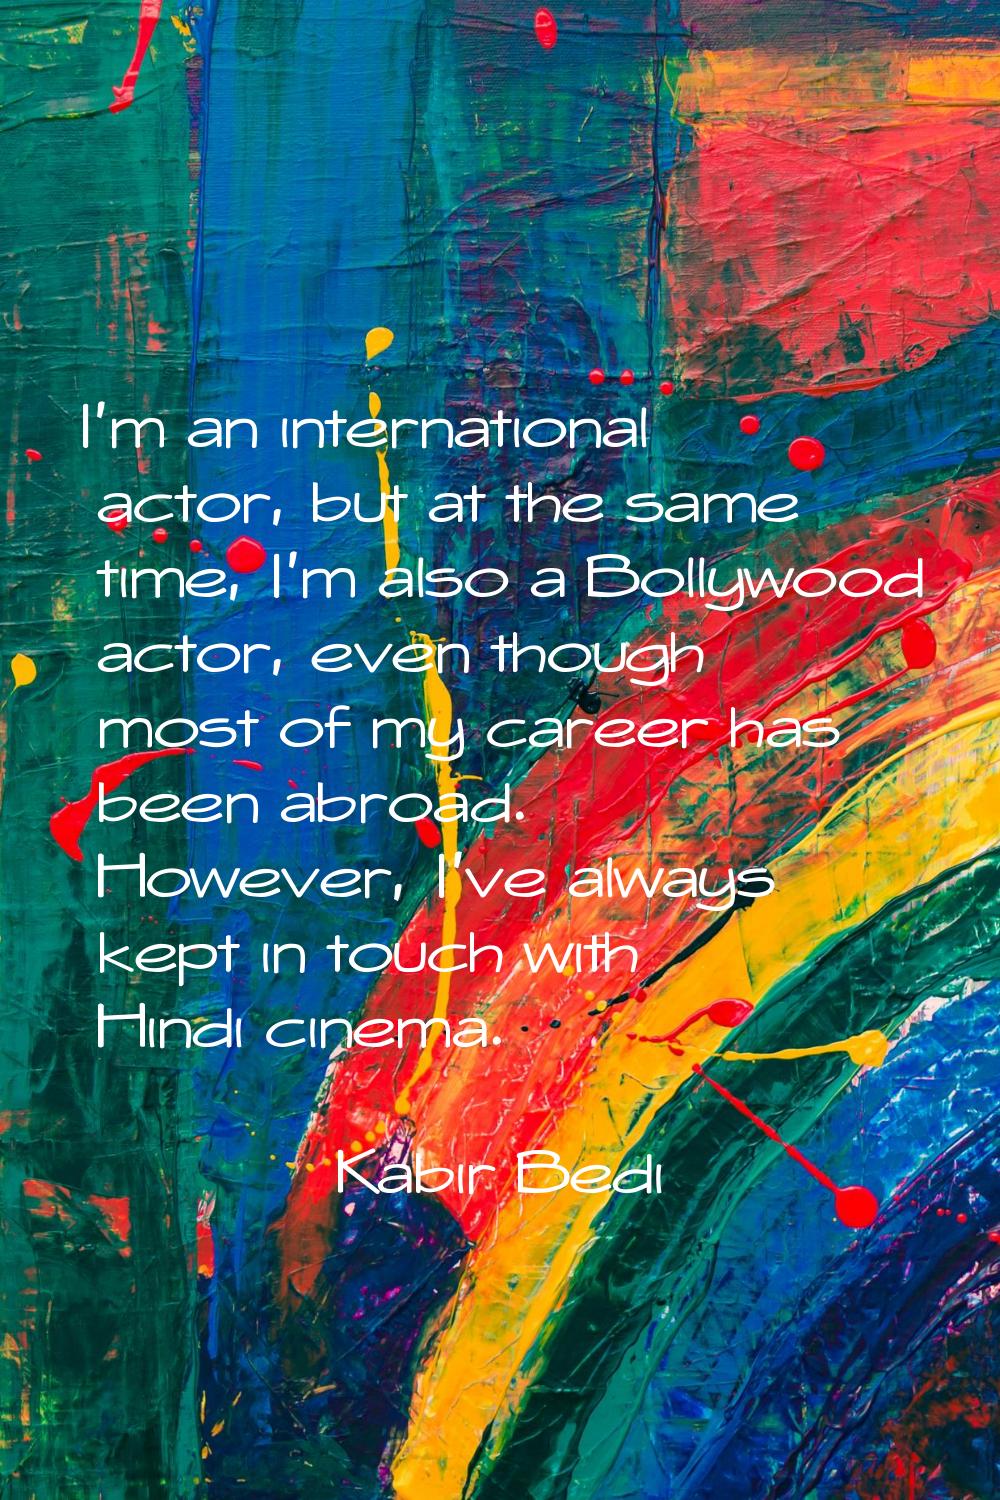 I'm an international actor, but at the same time, I'm also a Bollywood actor, even though most of m